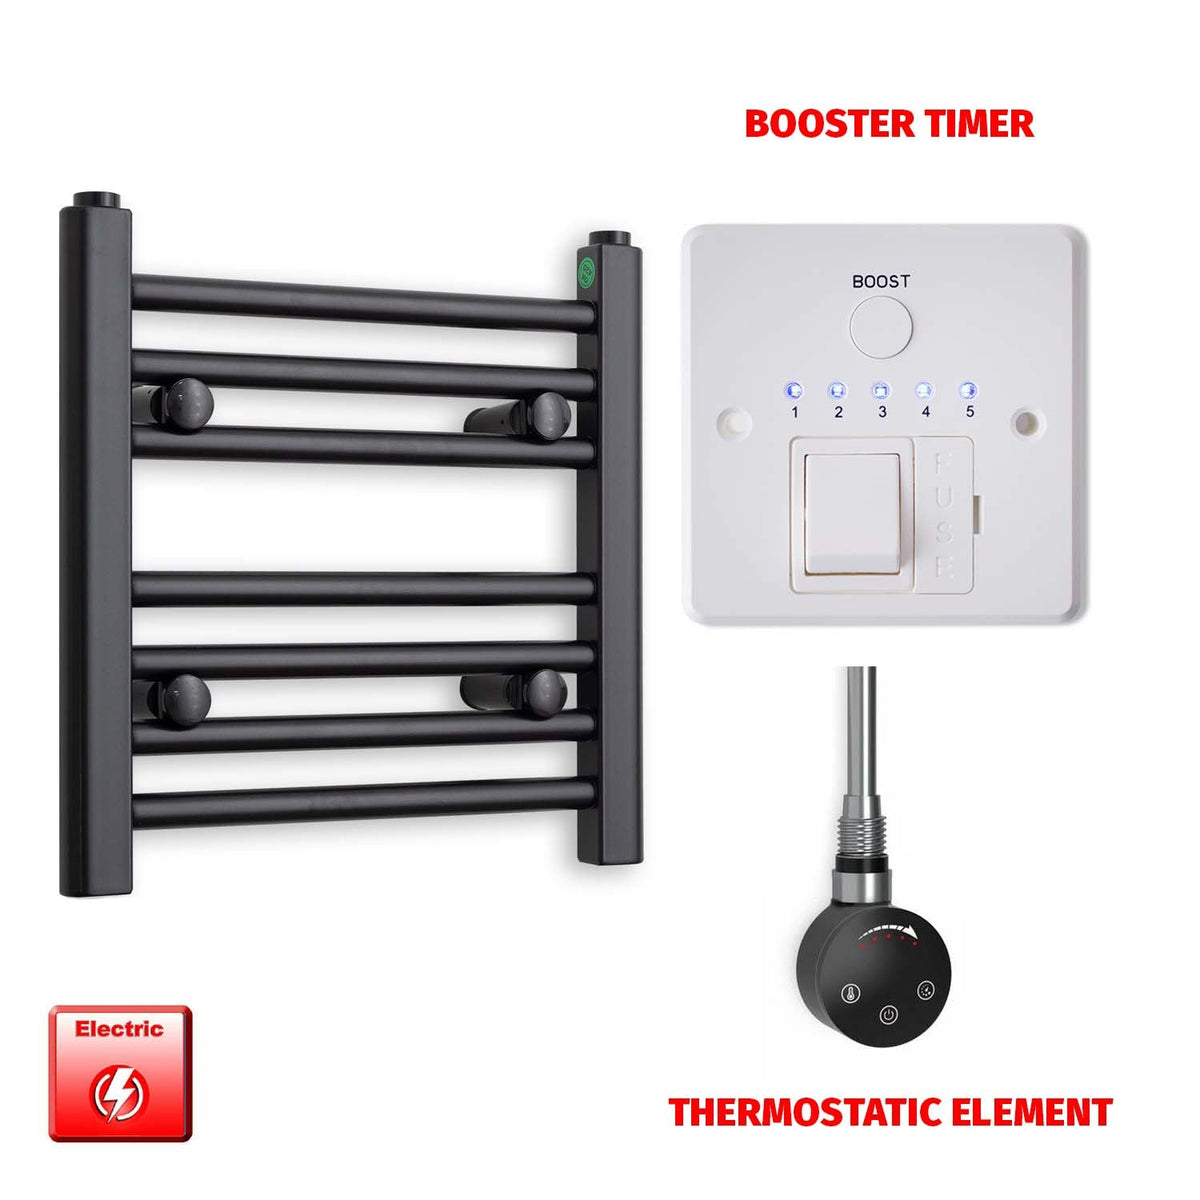 400 x 400 Flat Black Pre-Filled Electric Heated Towel Radiator HTR Smart Thermostatic Booster Timer